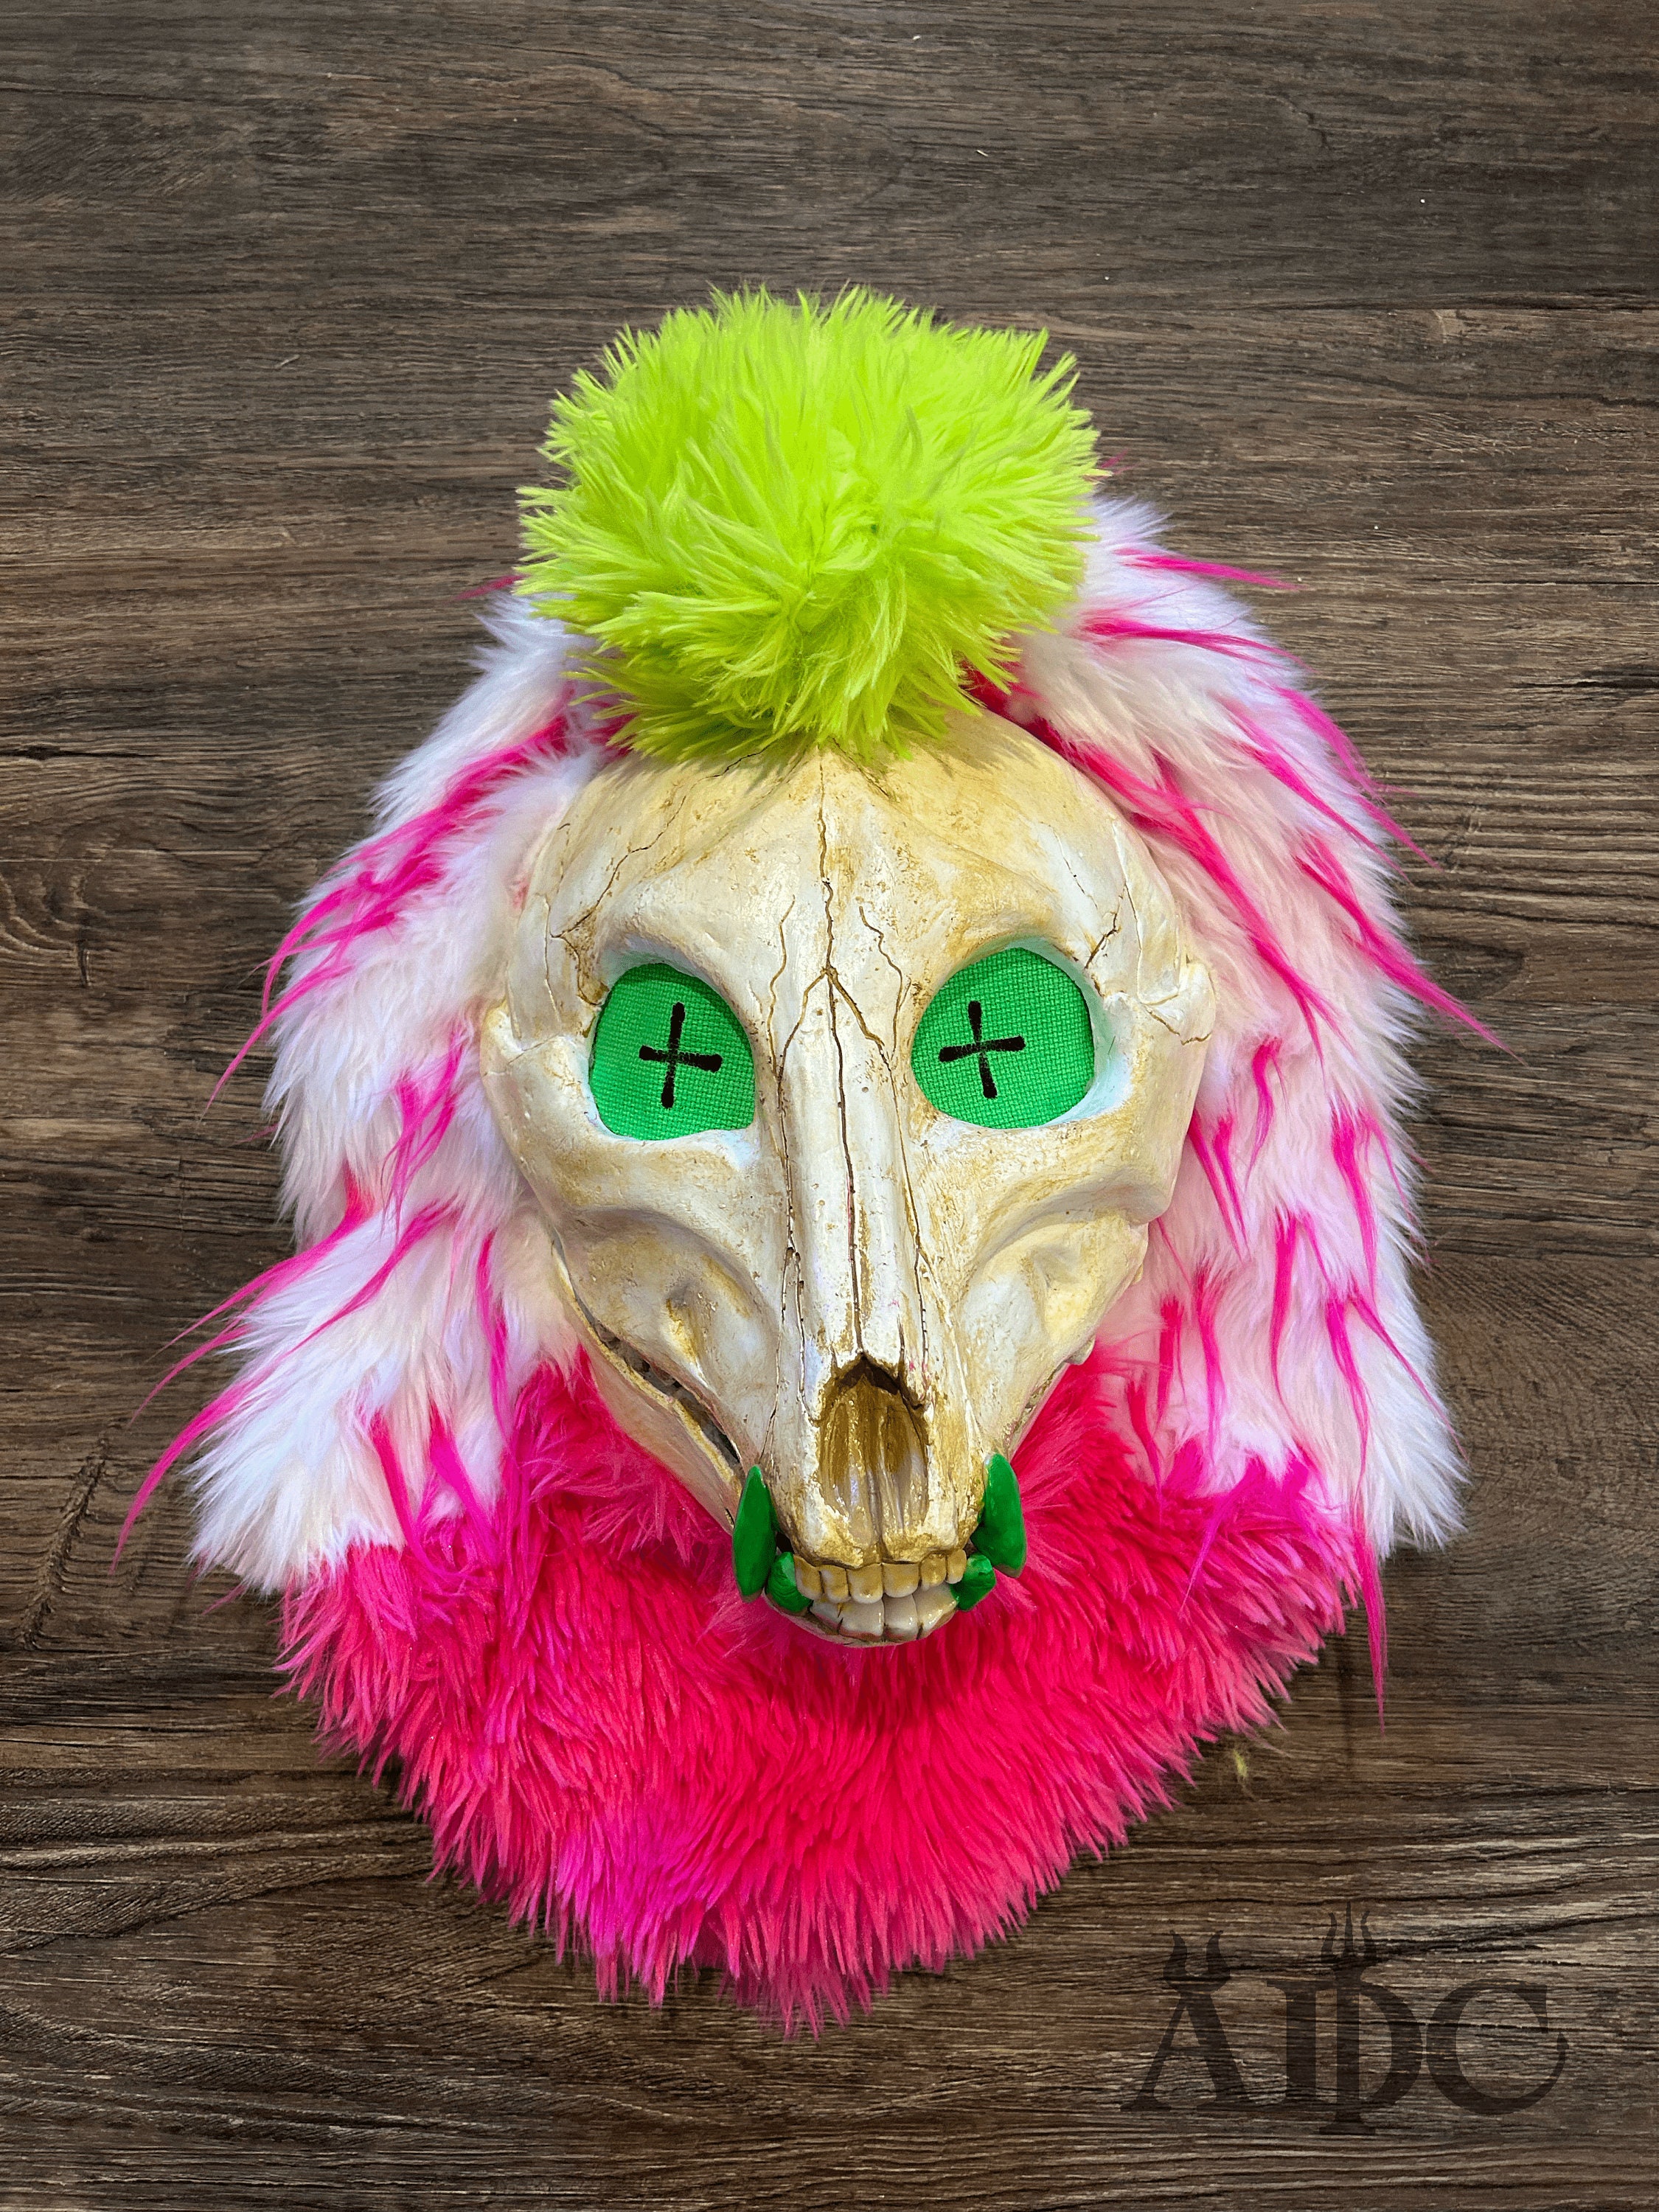 V3 Fox Skully - Advanced Wearable Skull Base Head Mask for Fursuit and –  IcyDragons